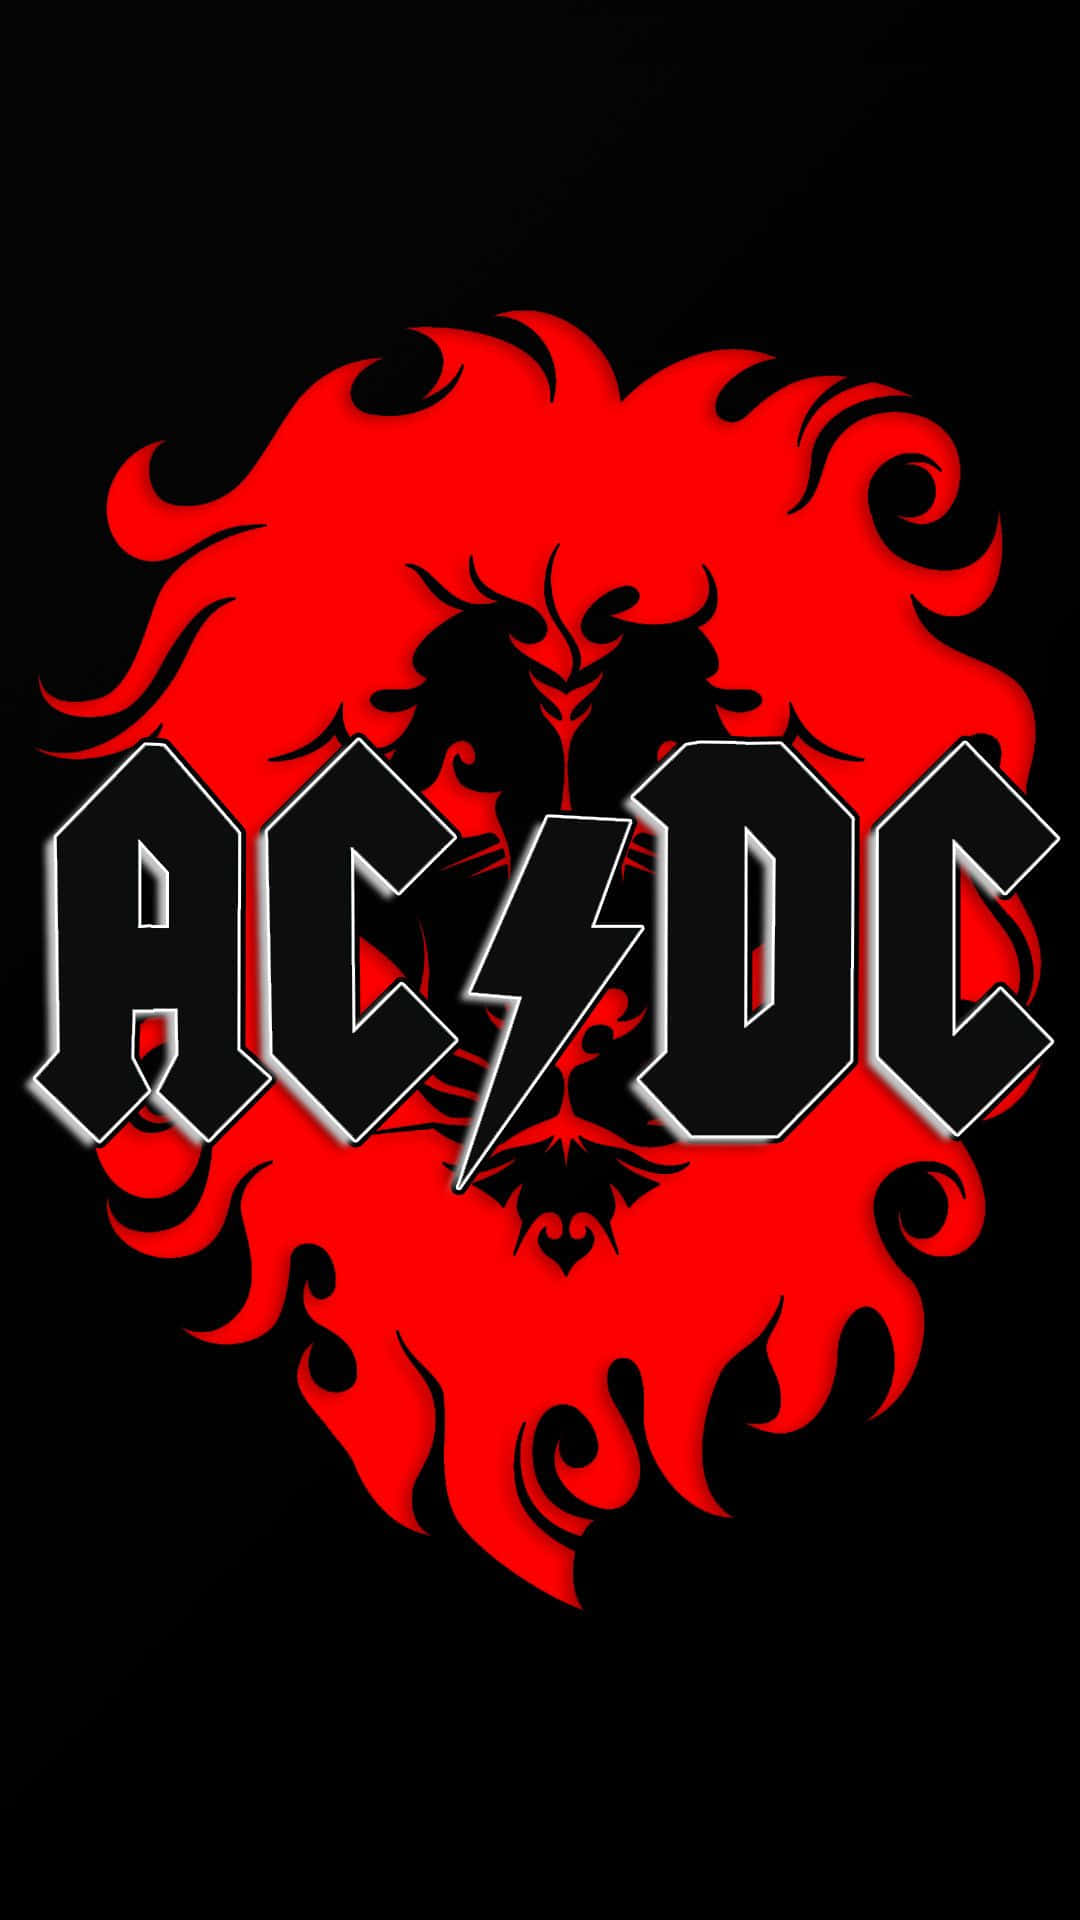 Rock On! The Legend That Is Ac/dc.